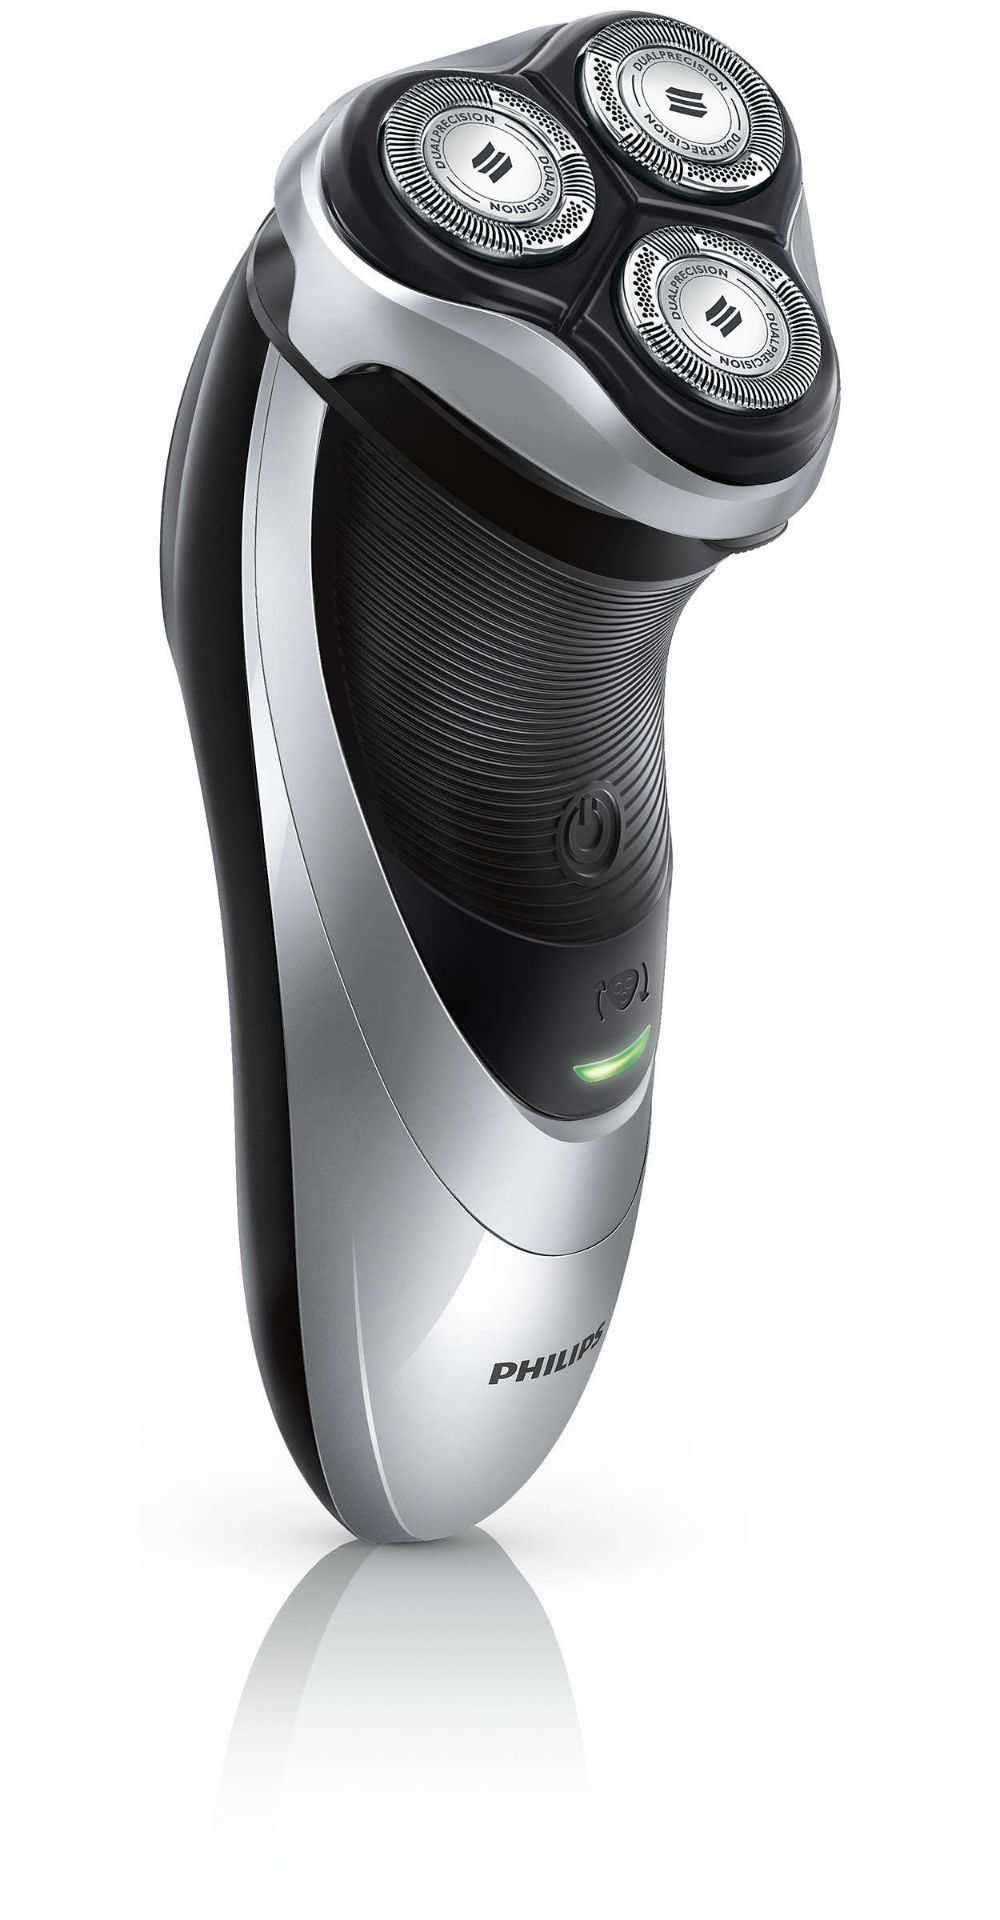 V *TRADE QTY* Brand New Philips Shaver Series 5000 - 3 Head Dual Precision Dry Electric Shaver - - Image 2 of 2